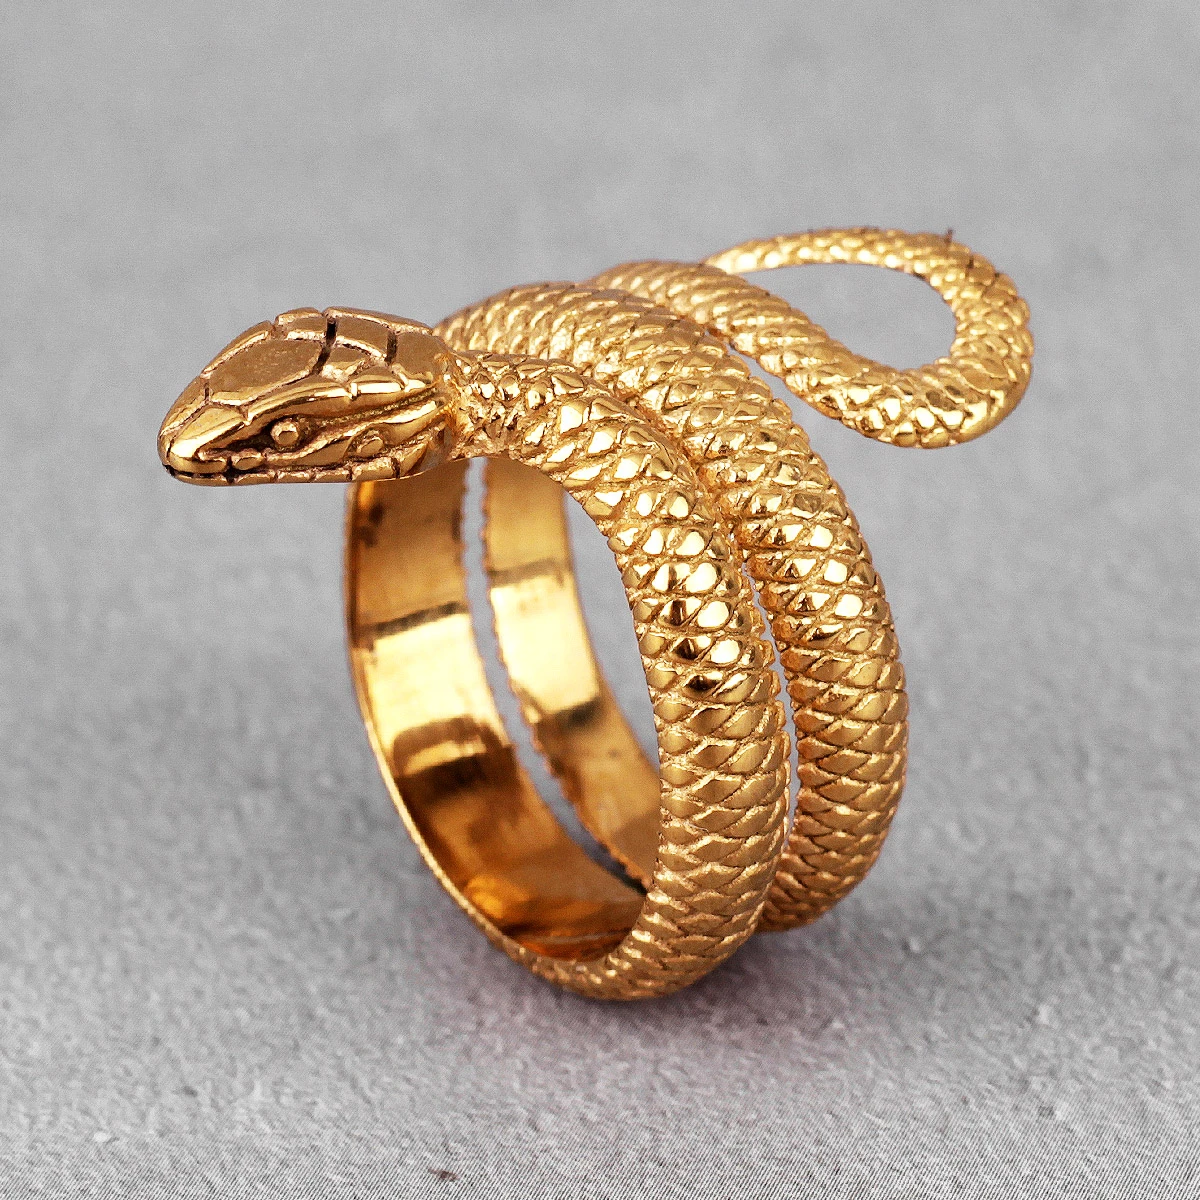 Gold Snake Animal Stainless Steel Mens Rings Punk Hip Hop Unique Trendy For Male Boyfriend Jewelry Creativity Gift Wholesale